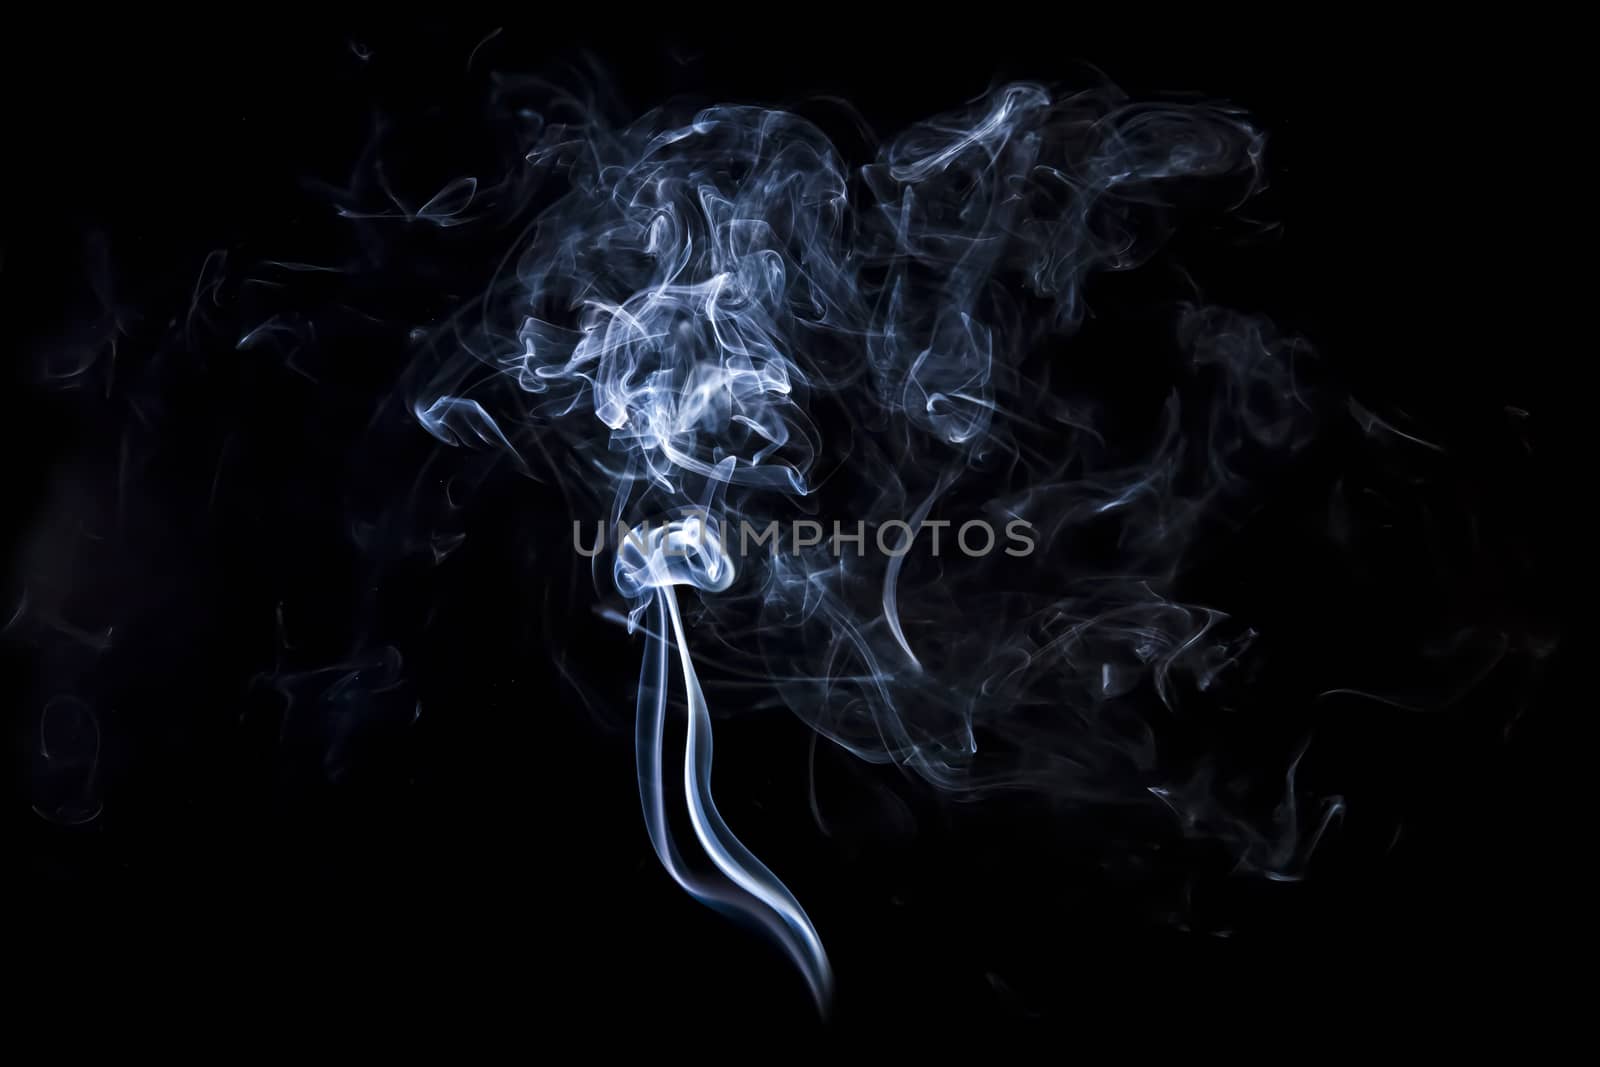 Gray smoke with light on back background